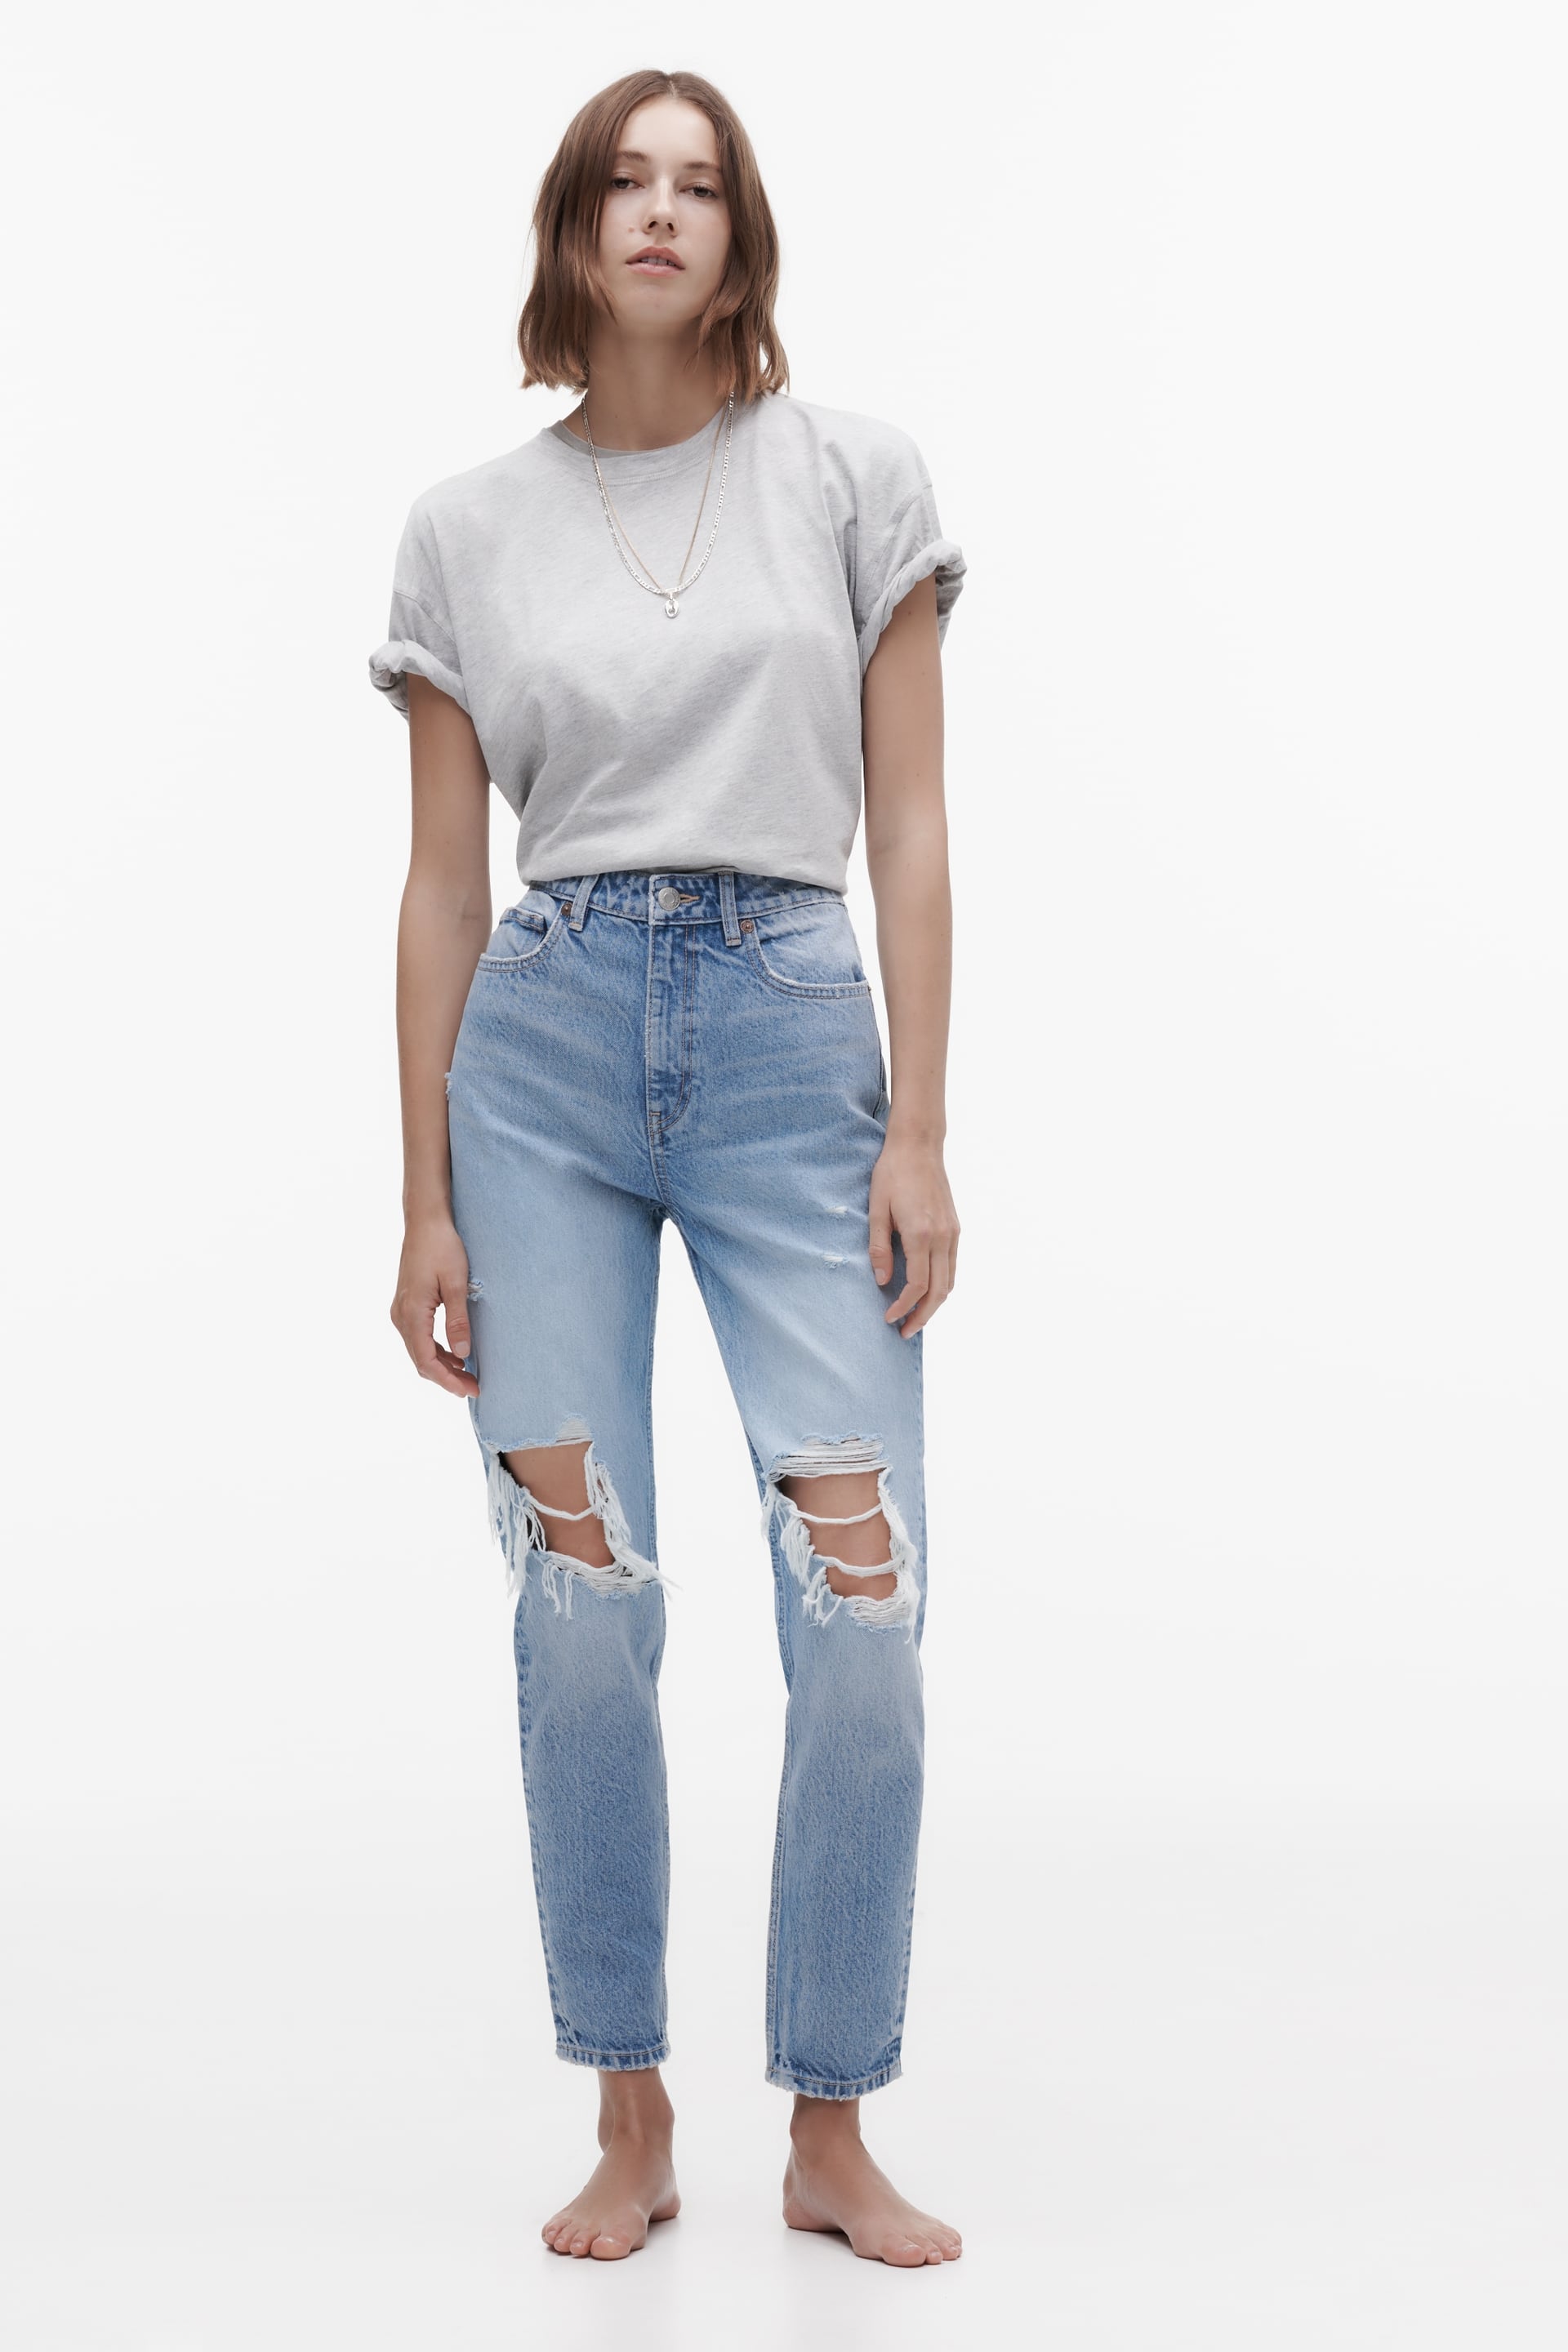 density Positive rival TRF RIPPED MOM FIT JEANS - Light blue | ZARA United States